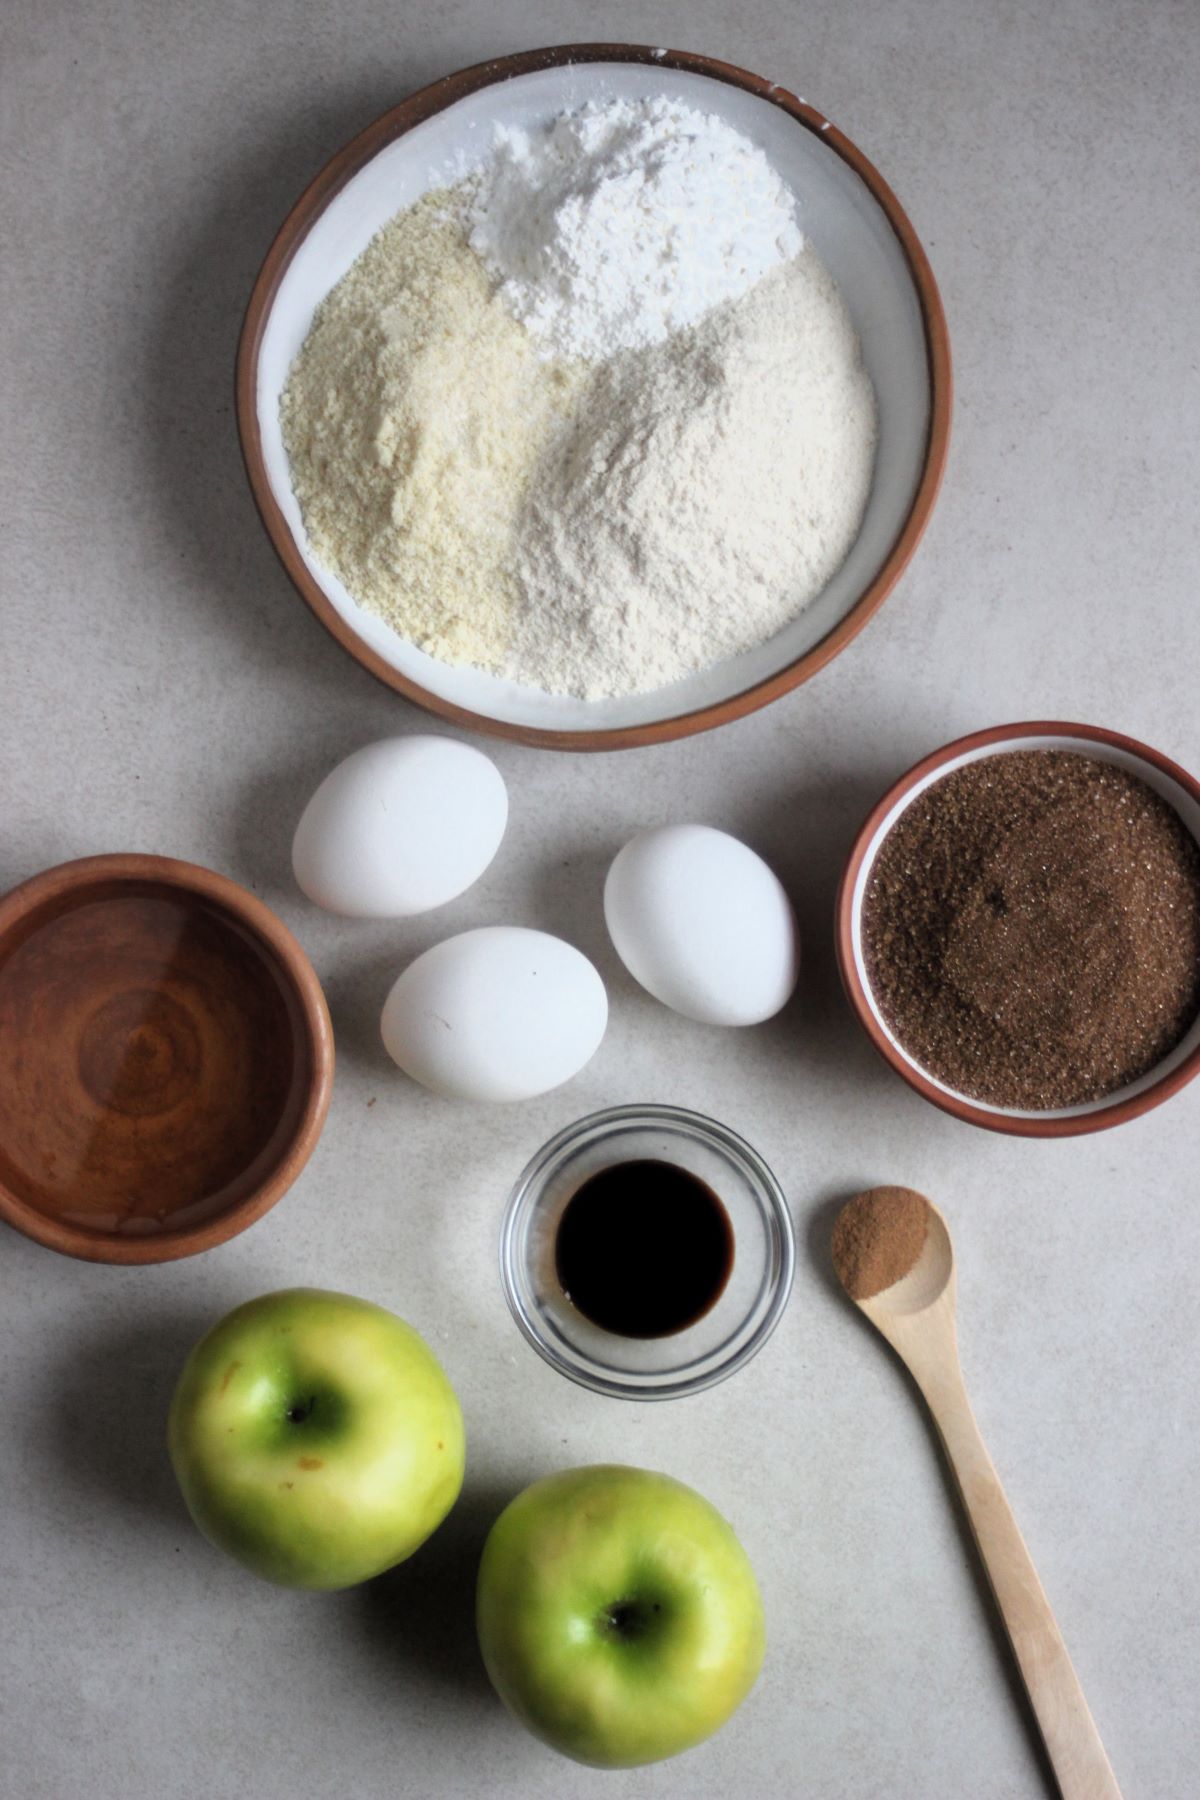 The apple cake recipe ingredients in different plates seen from above.